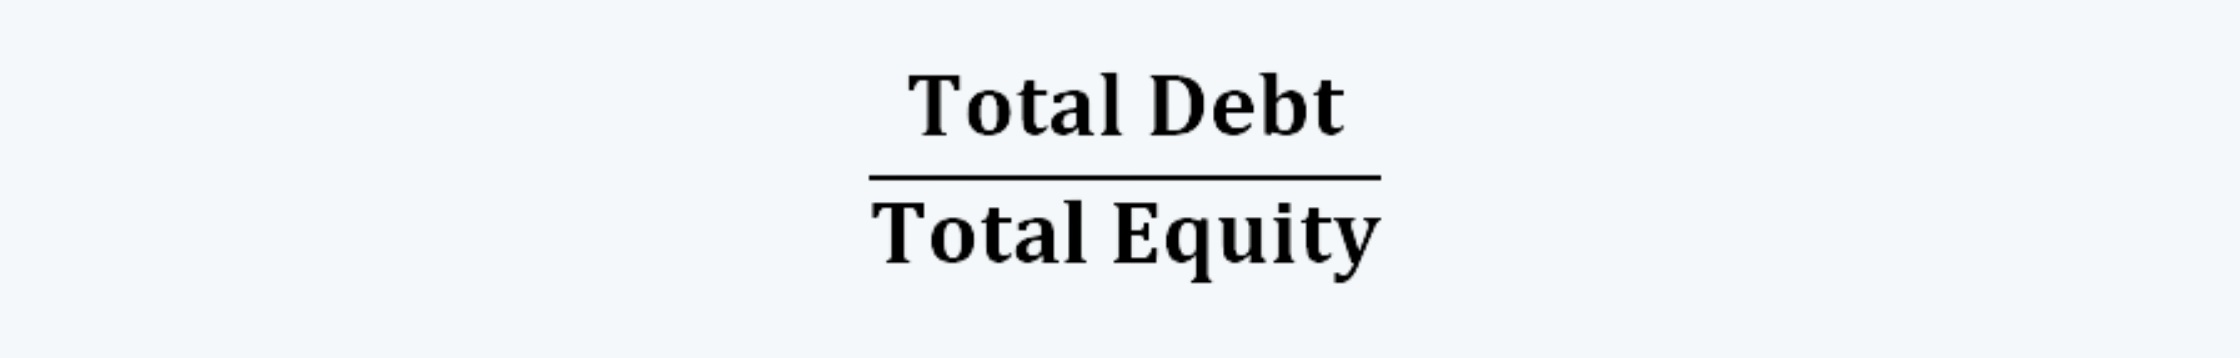 Total Debt to Equity Ratio FRA CFA Level 1 Study Notes